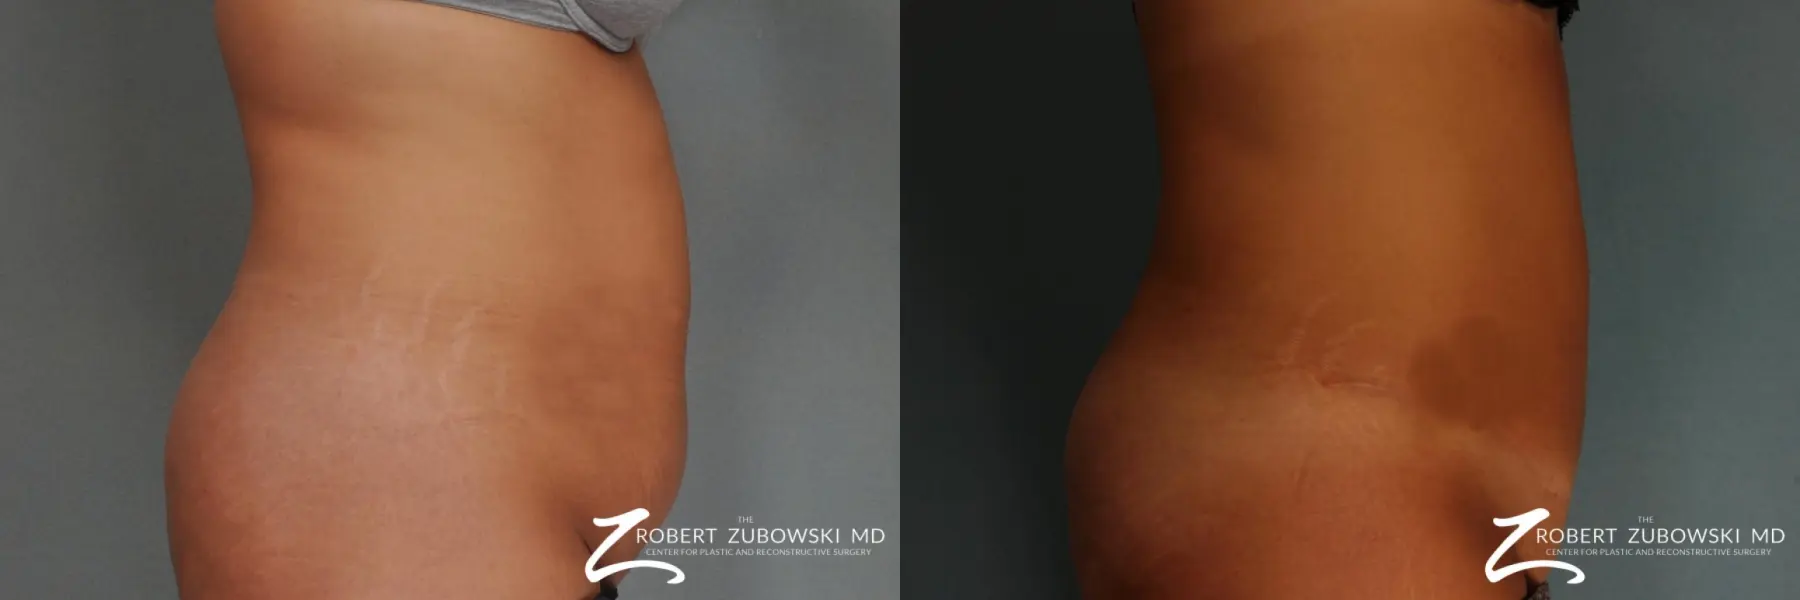 Tummy Tuck: Patient 21 - Before and After 2